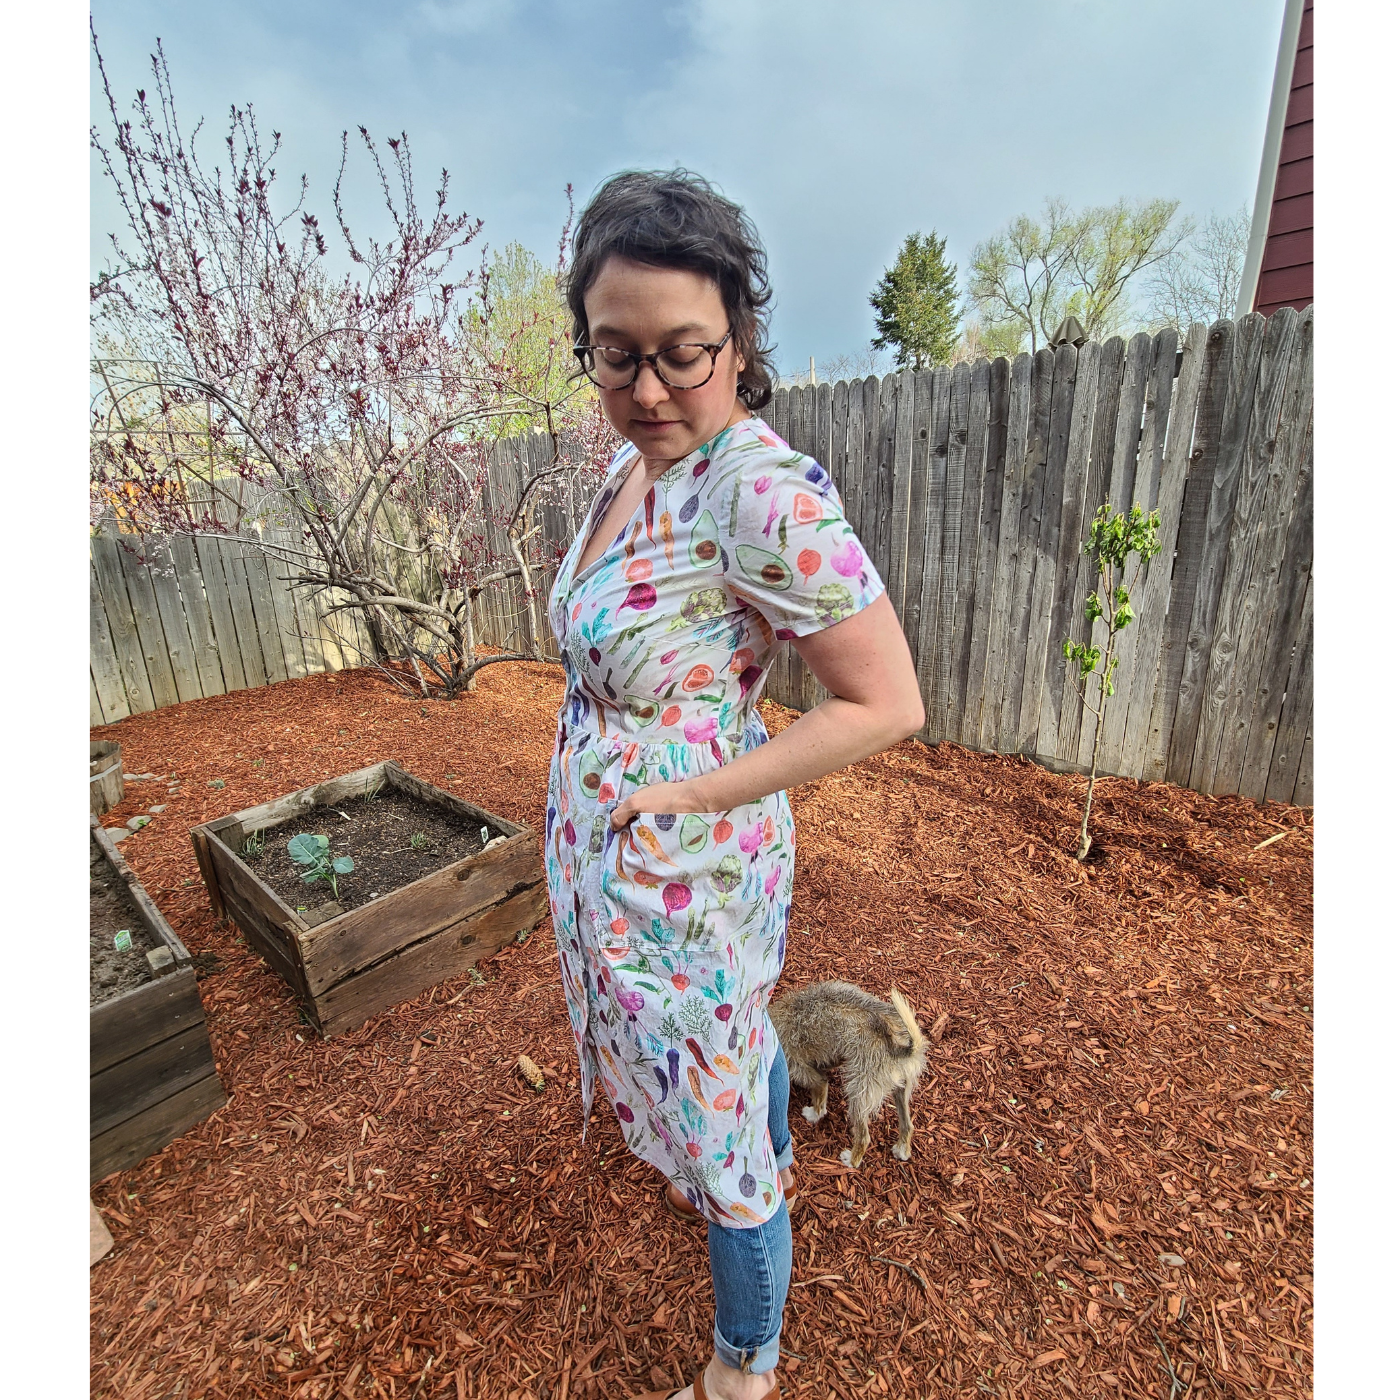 Angela stands to the side, looking down. A small furry tan dog is standing behind her. She is wearing a dress with a cream background and small rainbow vegetables all over it. She is wearing the dress over pants and standing in the mulch as if in a backyard near a brown wooden fence.